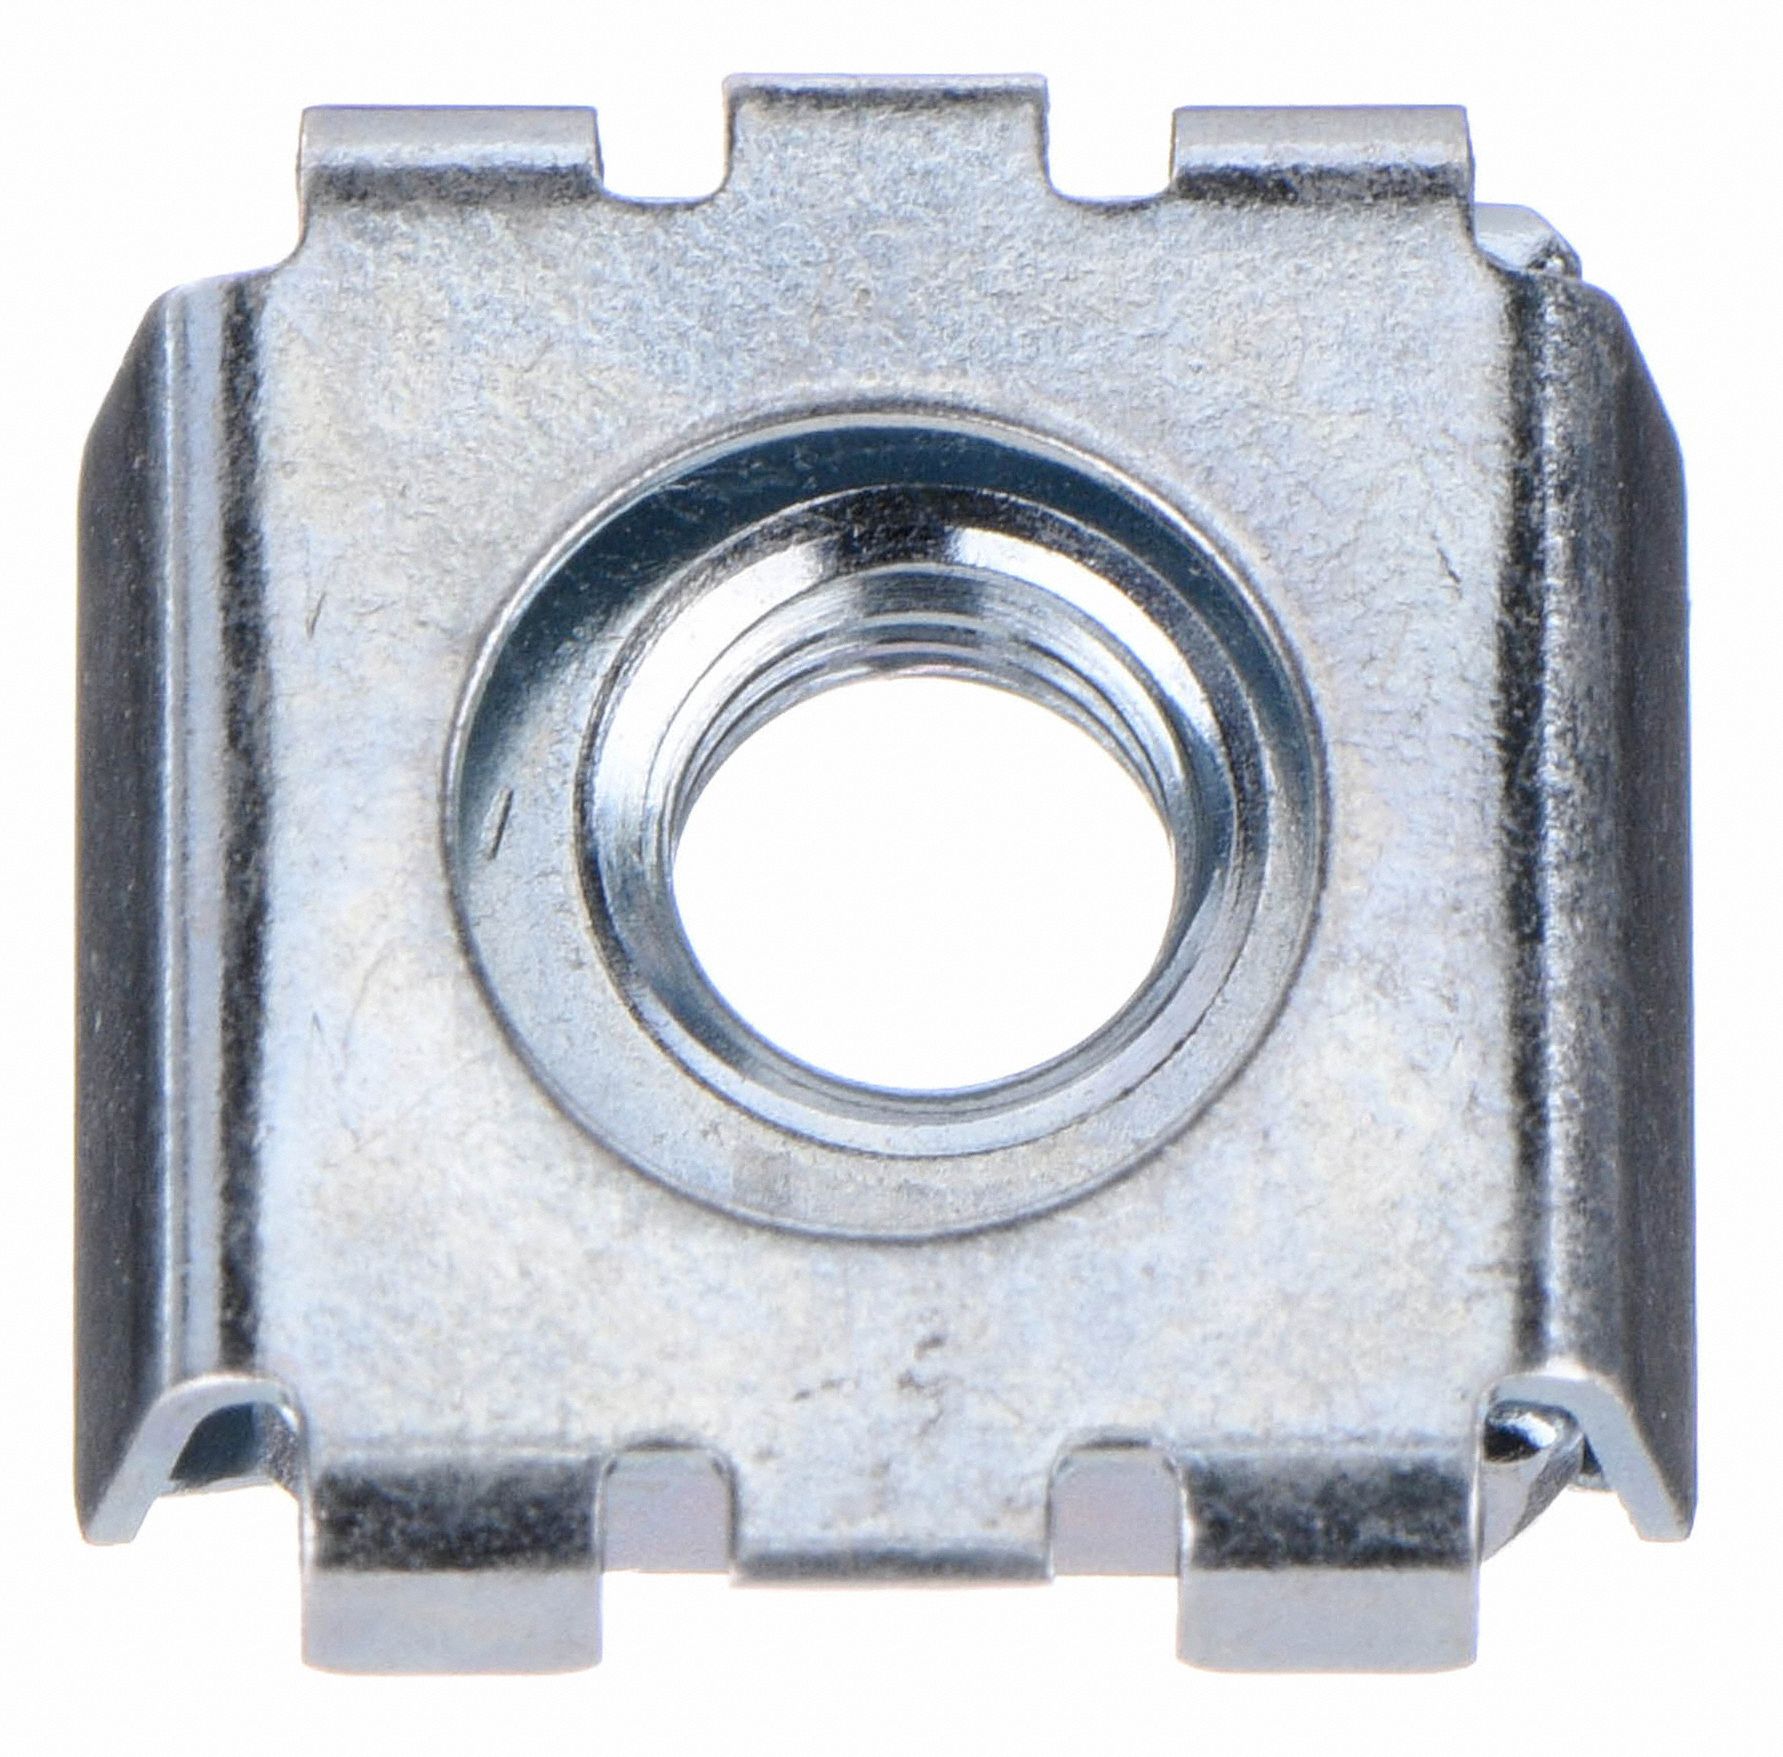 12-Pack The Hillman Group 44344 10-24 Cage Nut